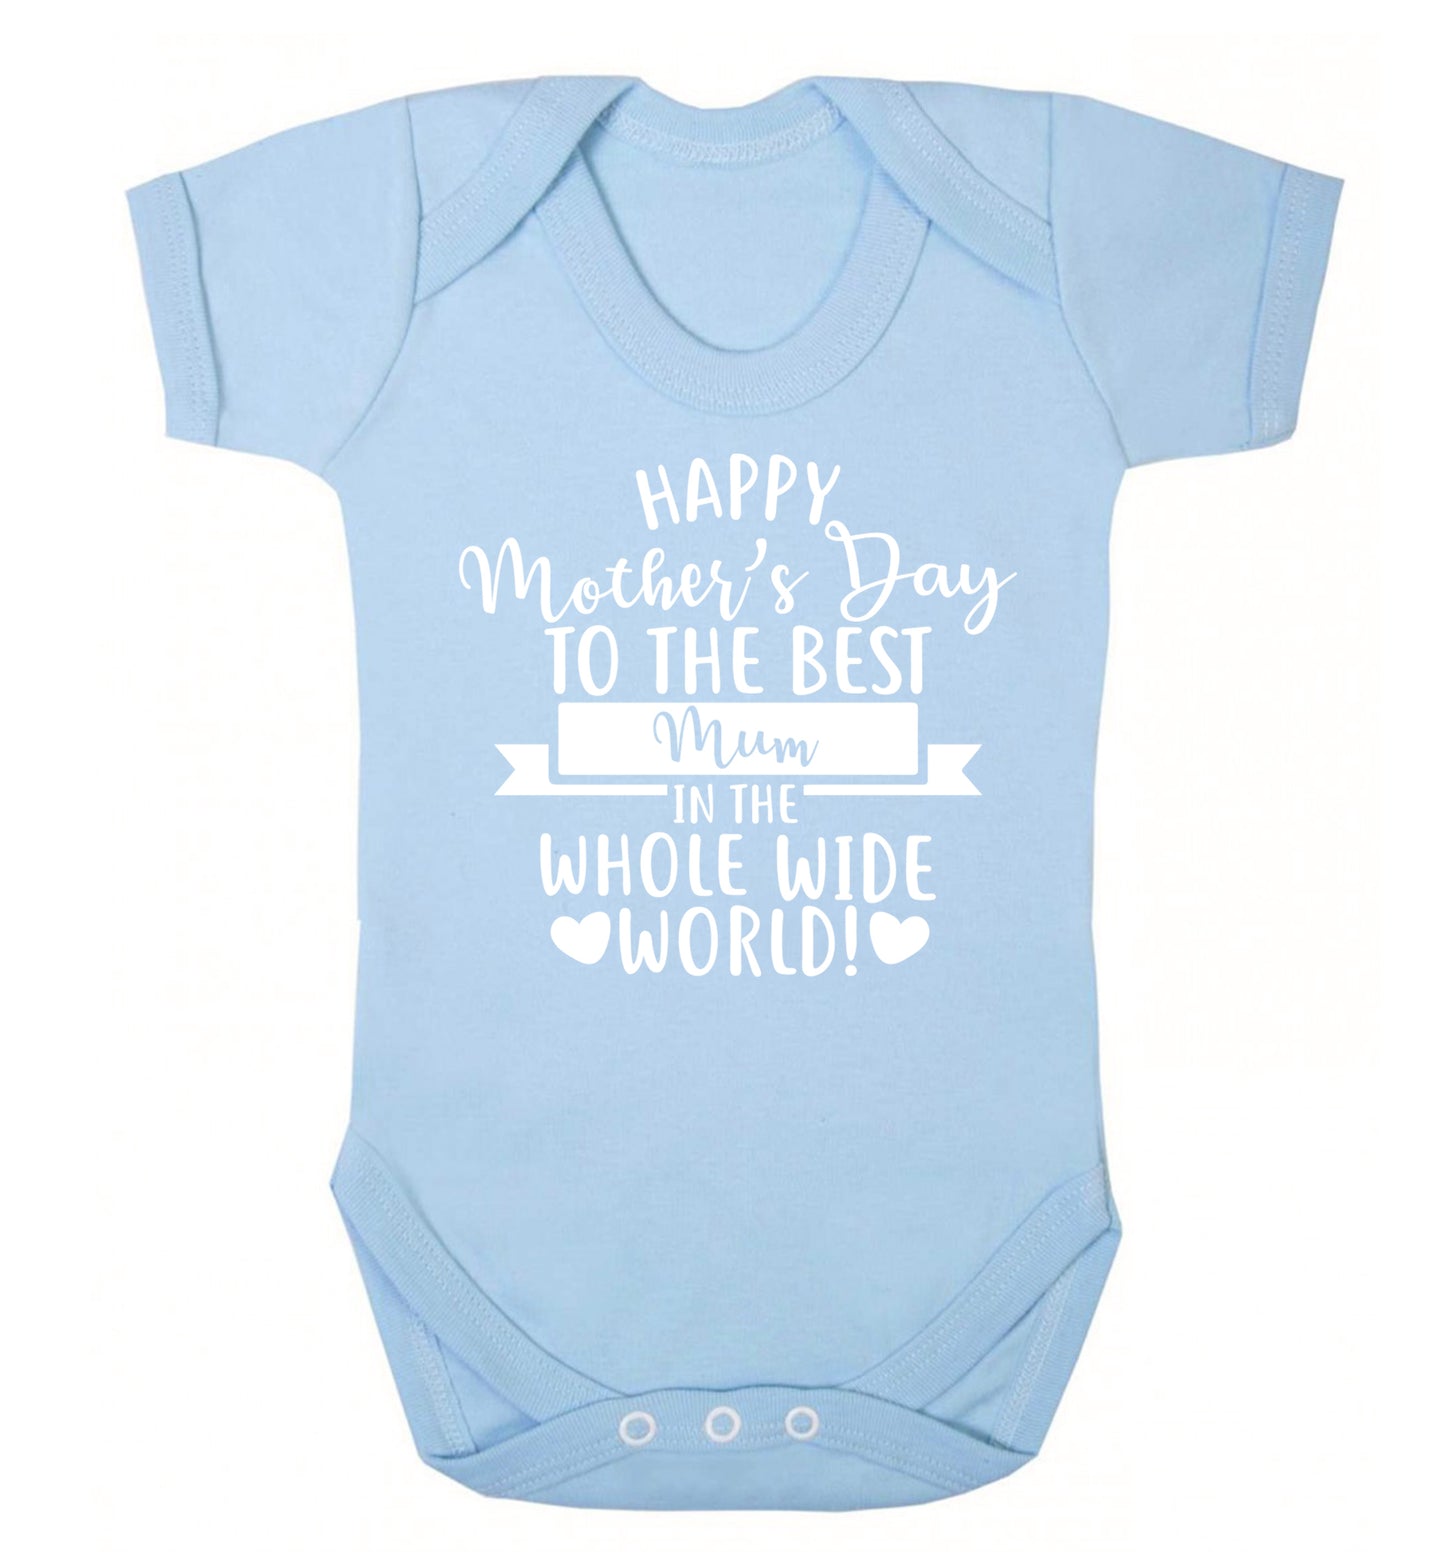 Happy Mother's Day to the best mum in the whole wide world! Baby Vest pale blue 18-24 months